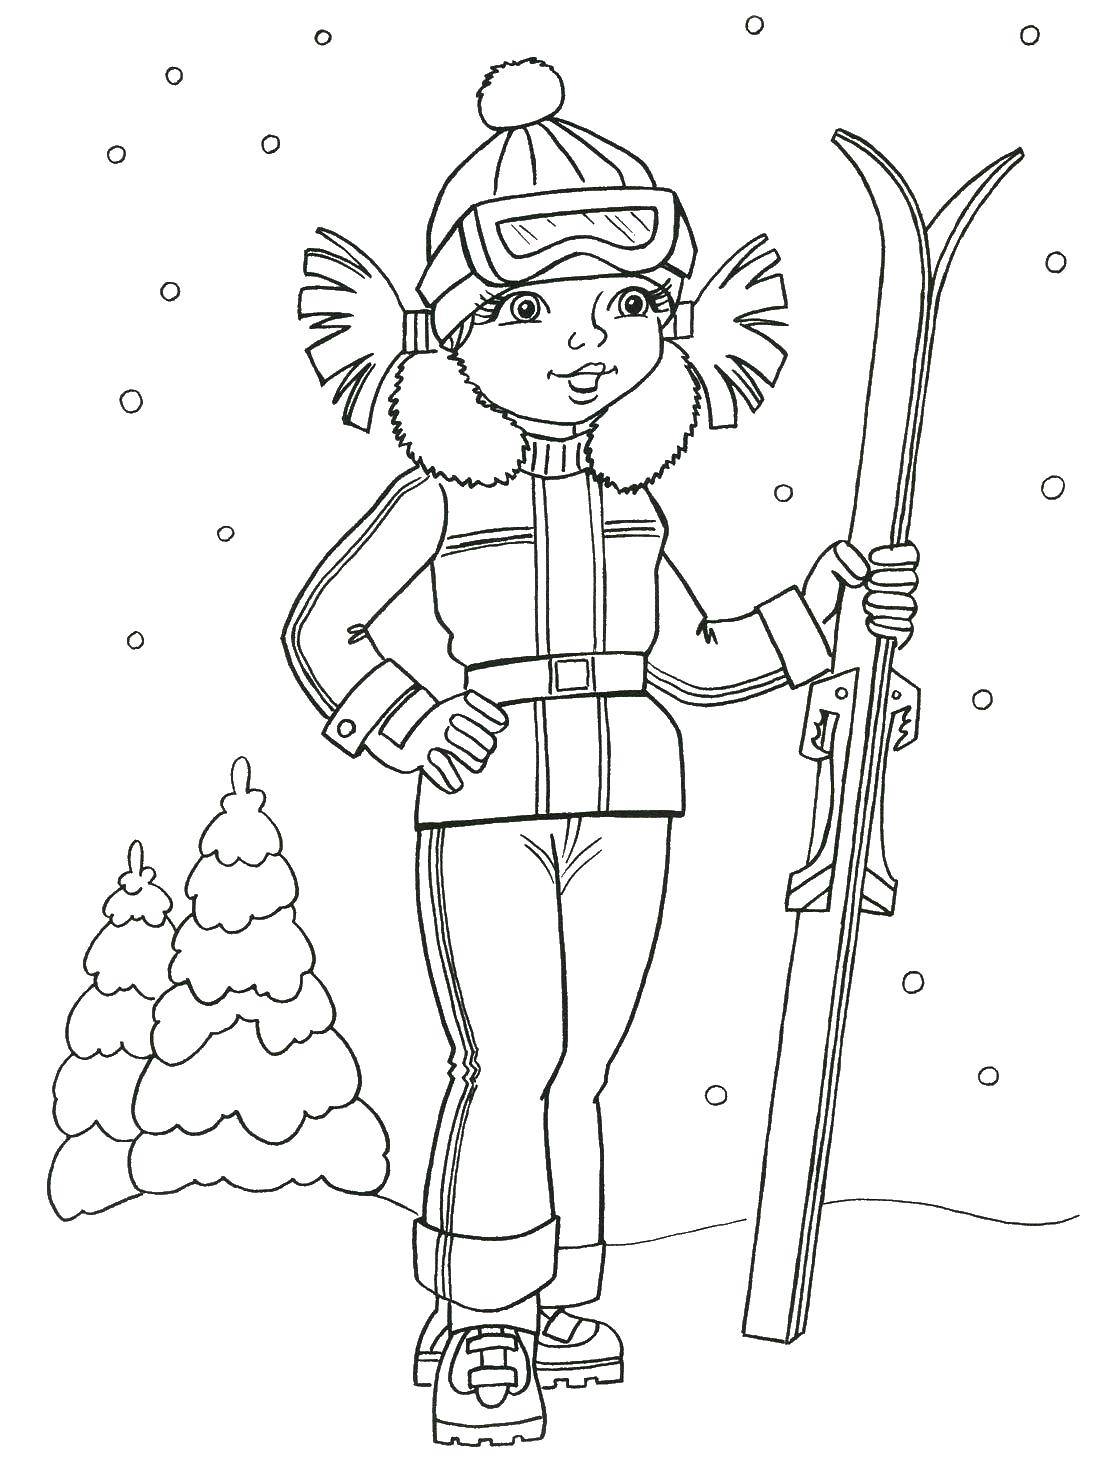 Coloring Skier. Category skiing. Tags:  skier, skiing.